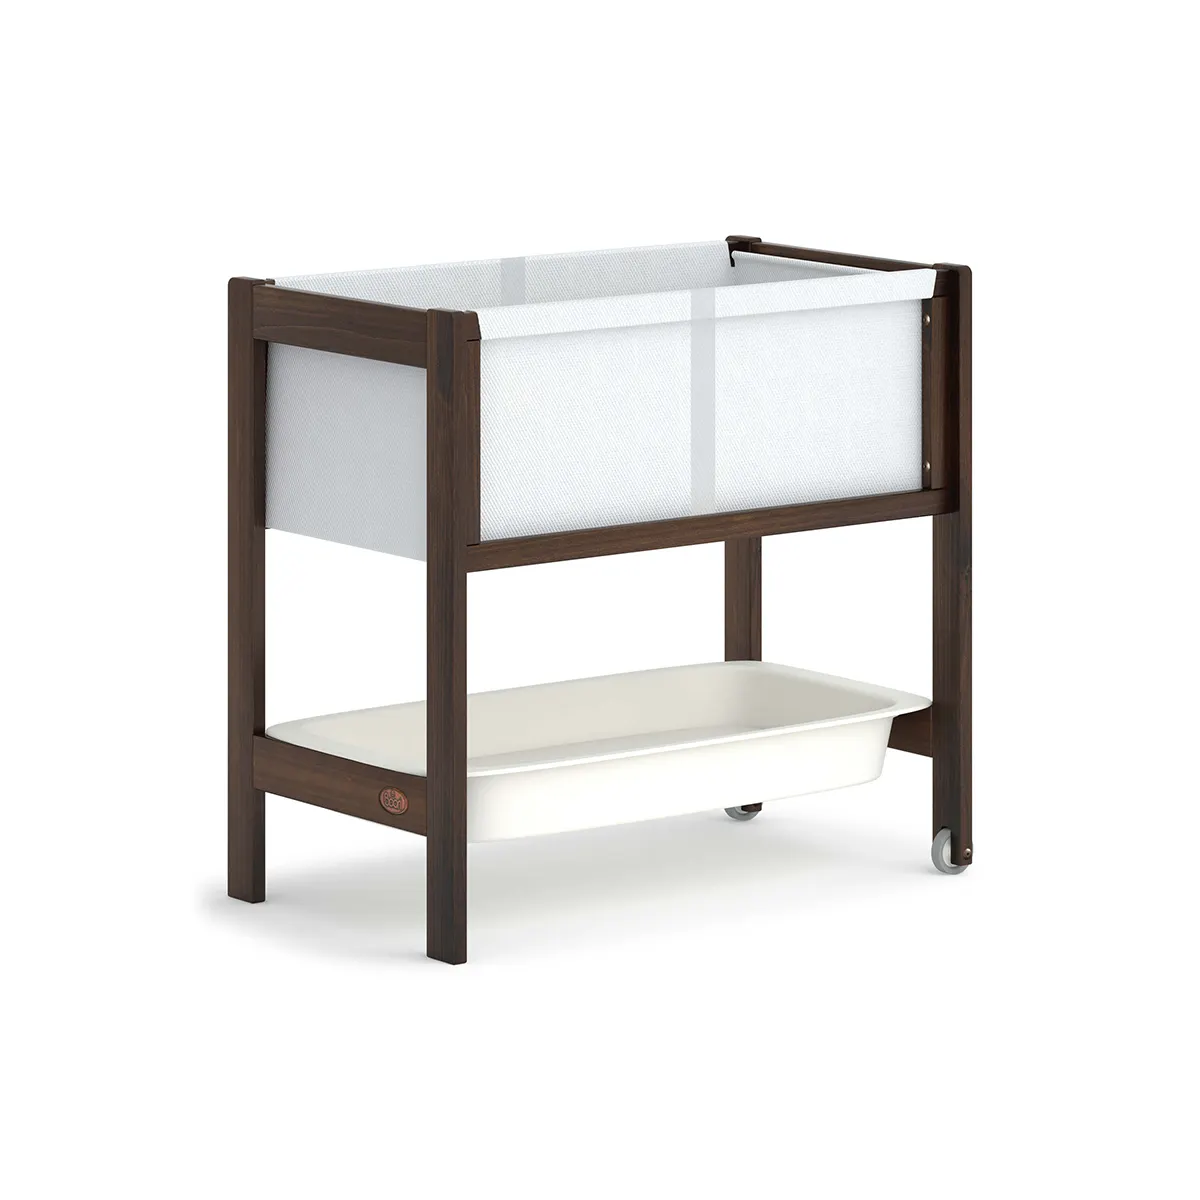 bassinet multifunction OBM manufacturer pine wood coffee baby changing station changing table wooden baby furniture